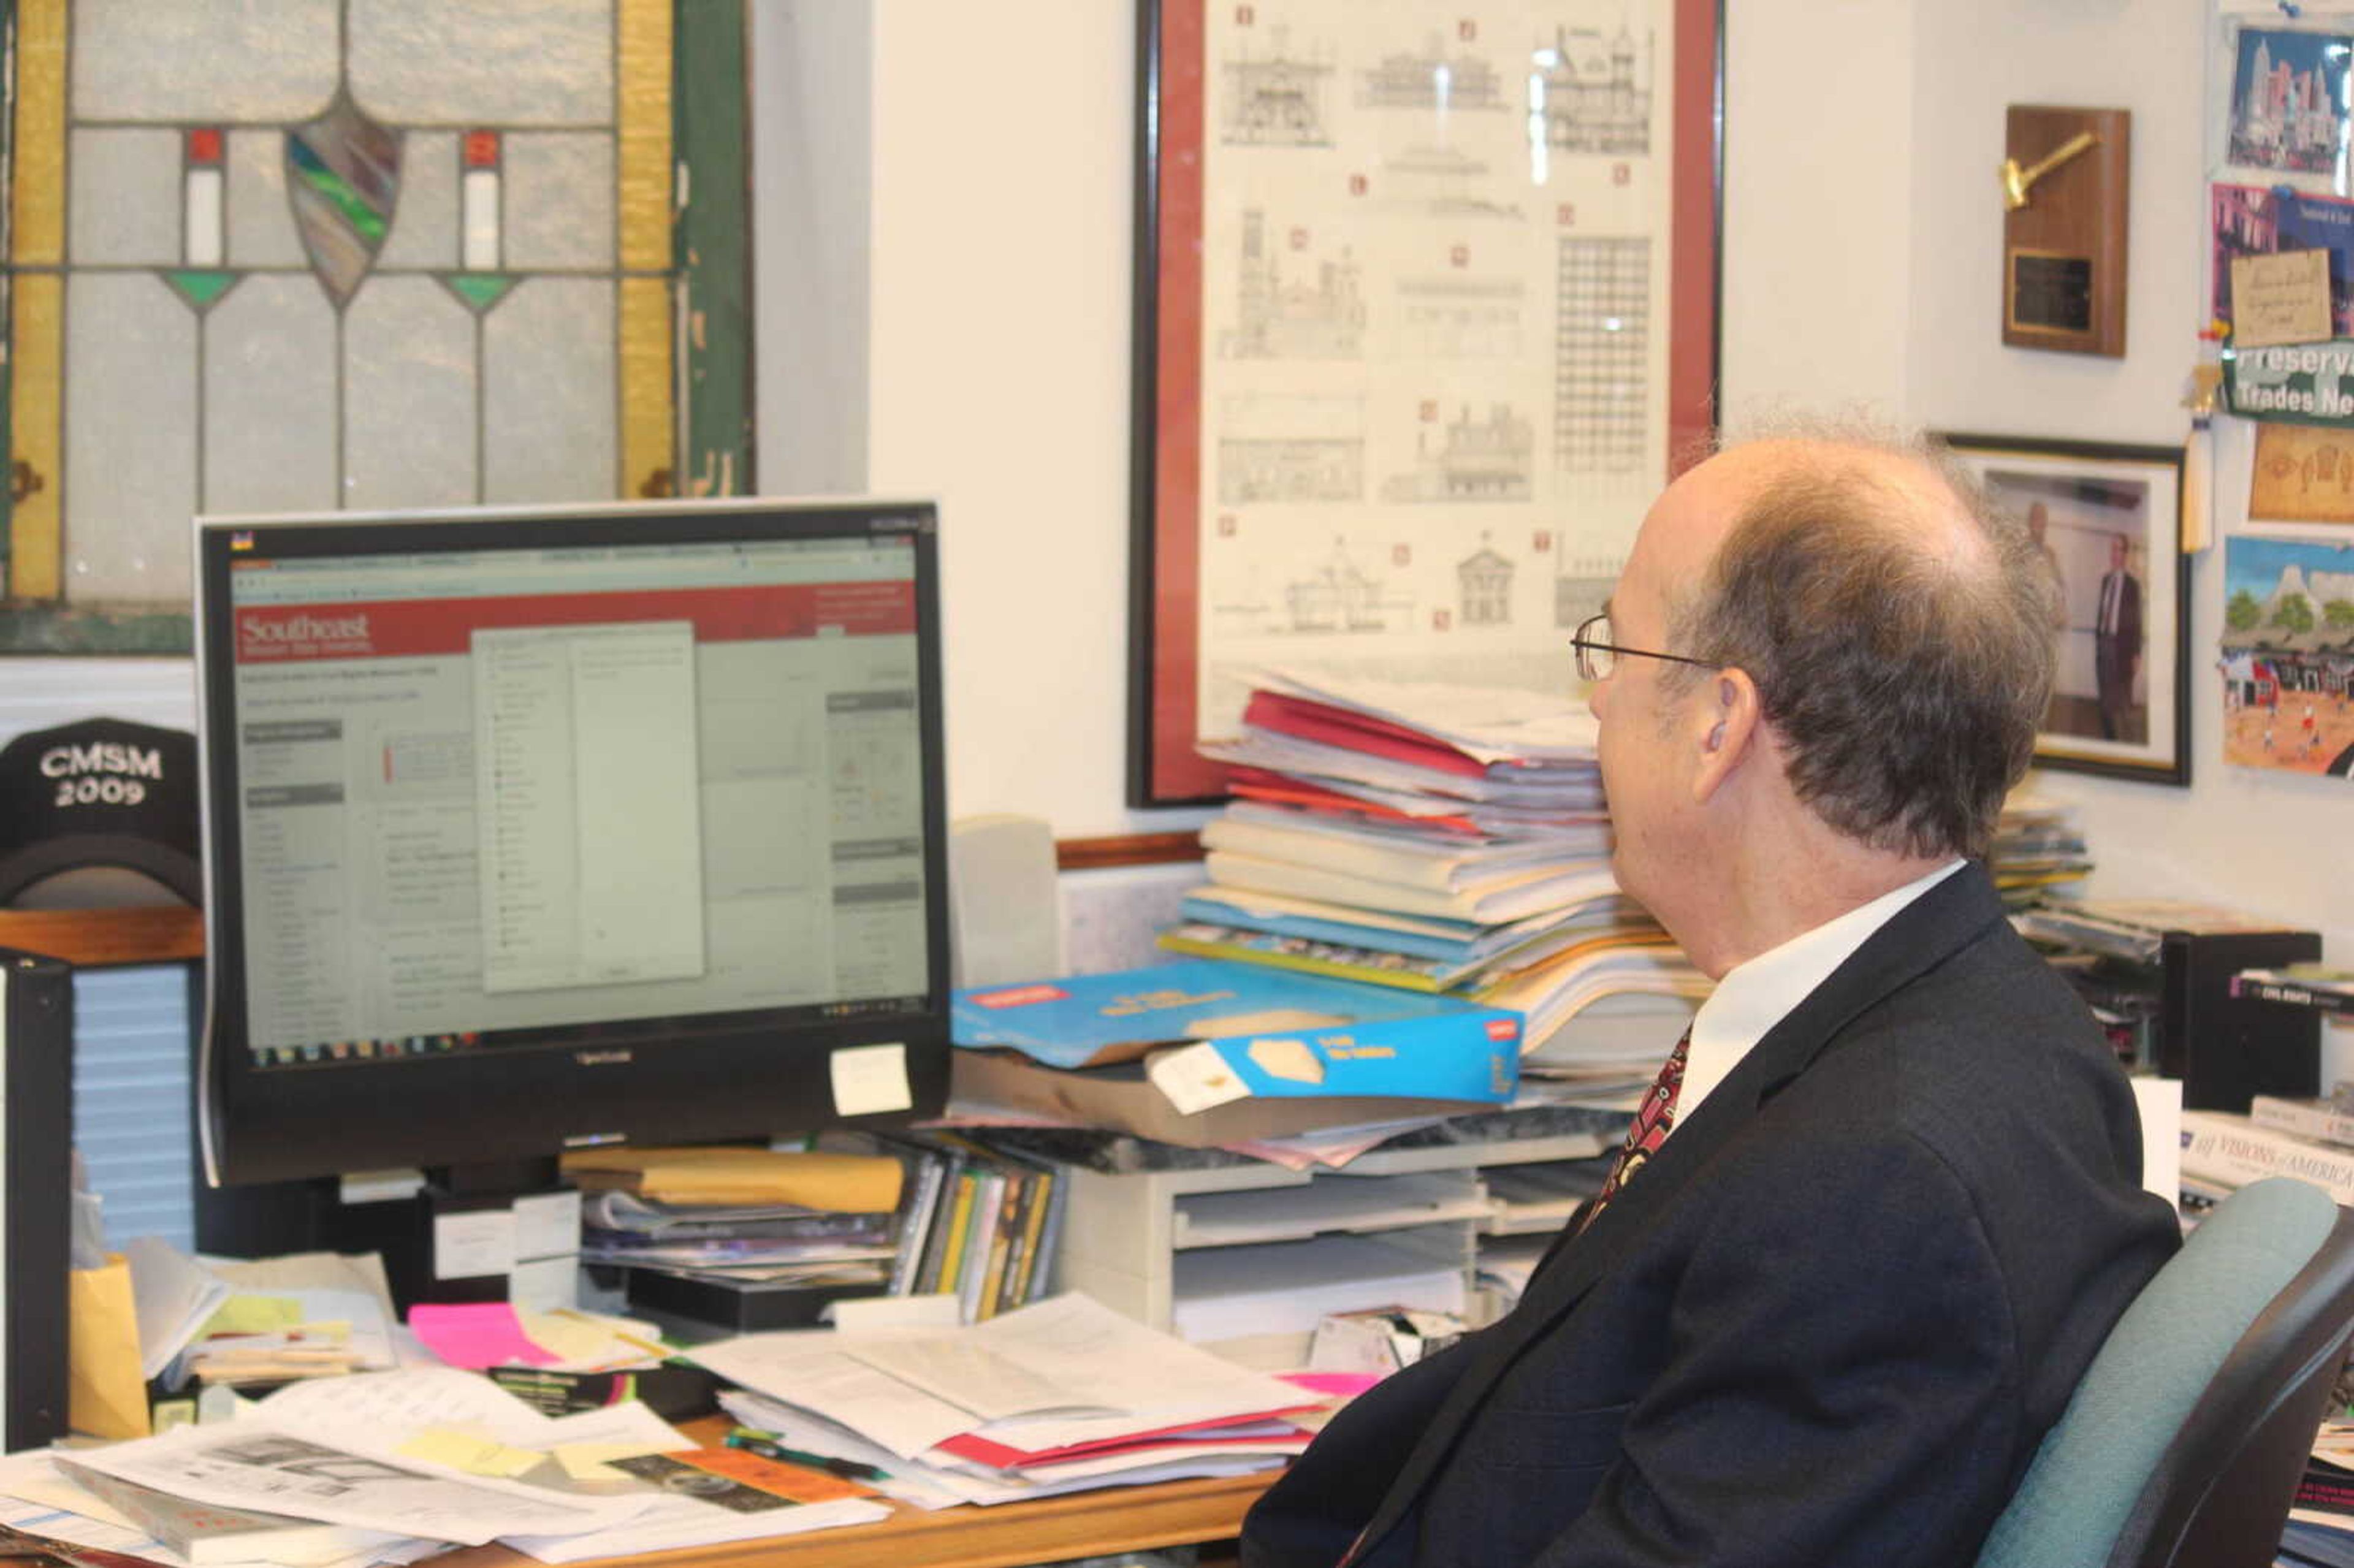 Dr. Steven Hoffmann working with Moodle at his desk. Photo taken by Michael Ryan.